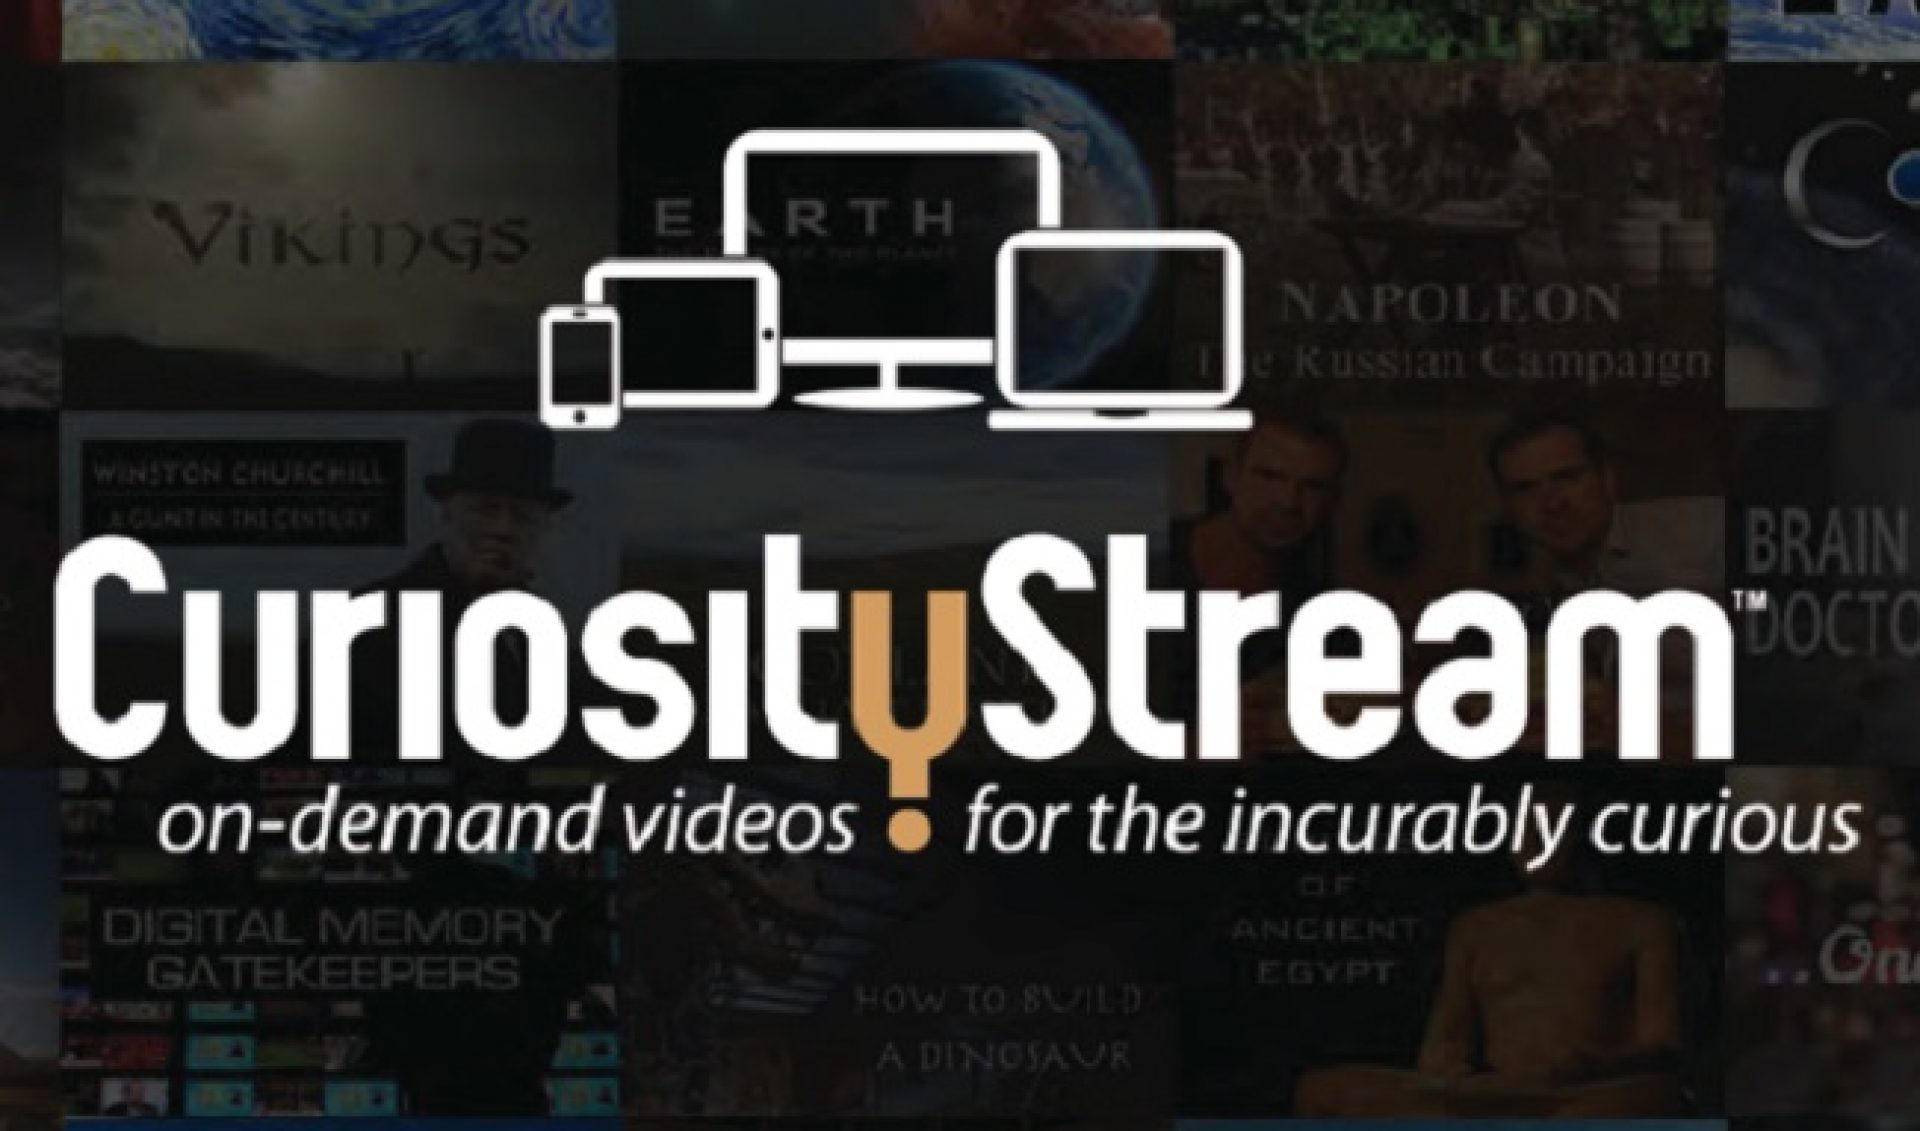 Discovery’s Founder Will Launch SVOD Service CuriosityStream